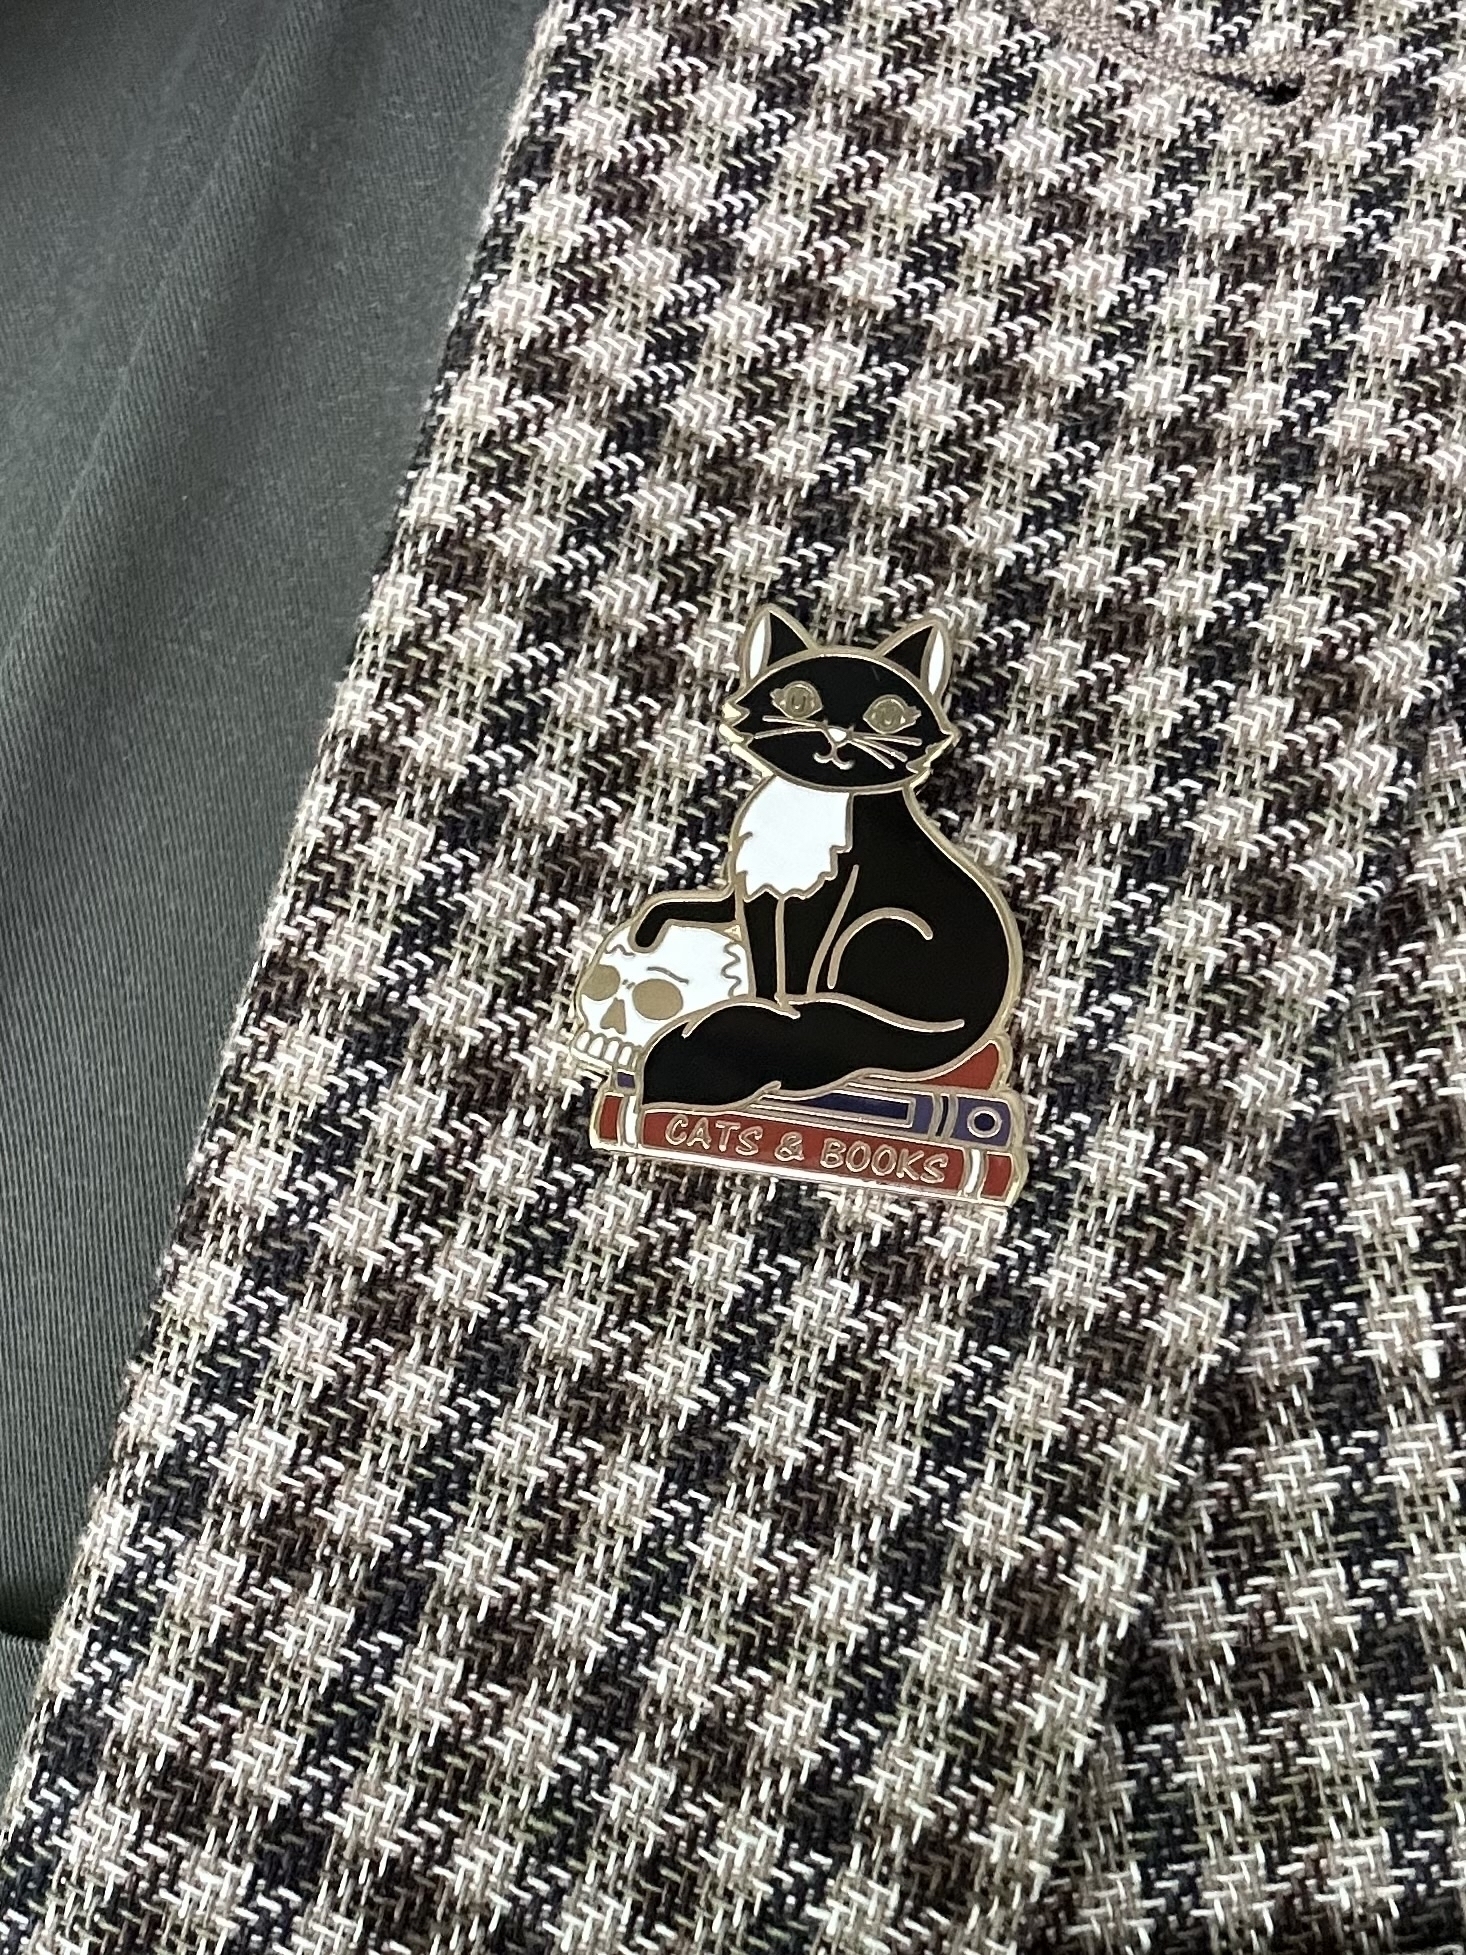 An enamel lapel badge pinned on a green check sports jacket. The badge is a black cat sitting on books with one paw resting on a small white skull. The bottom book is red and has “Cats & Books” in gold lettering on the spine.